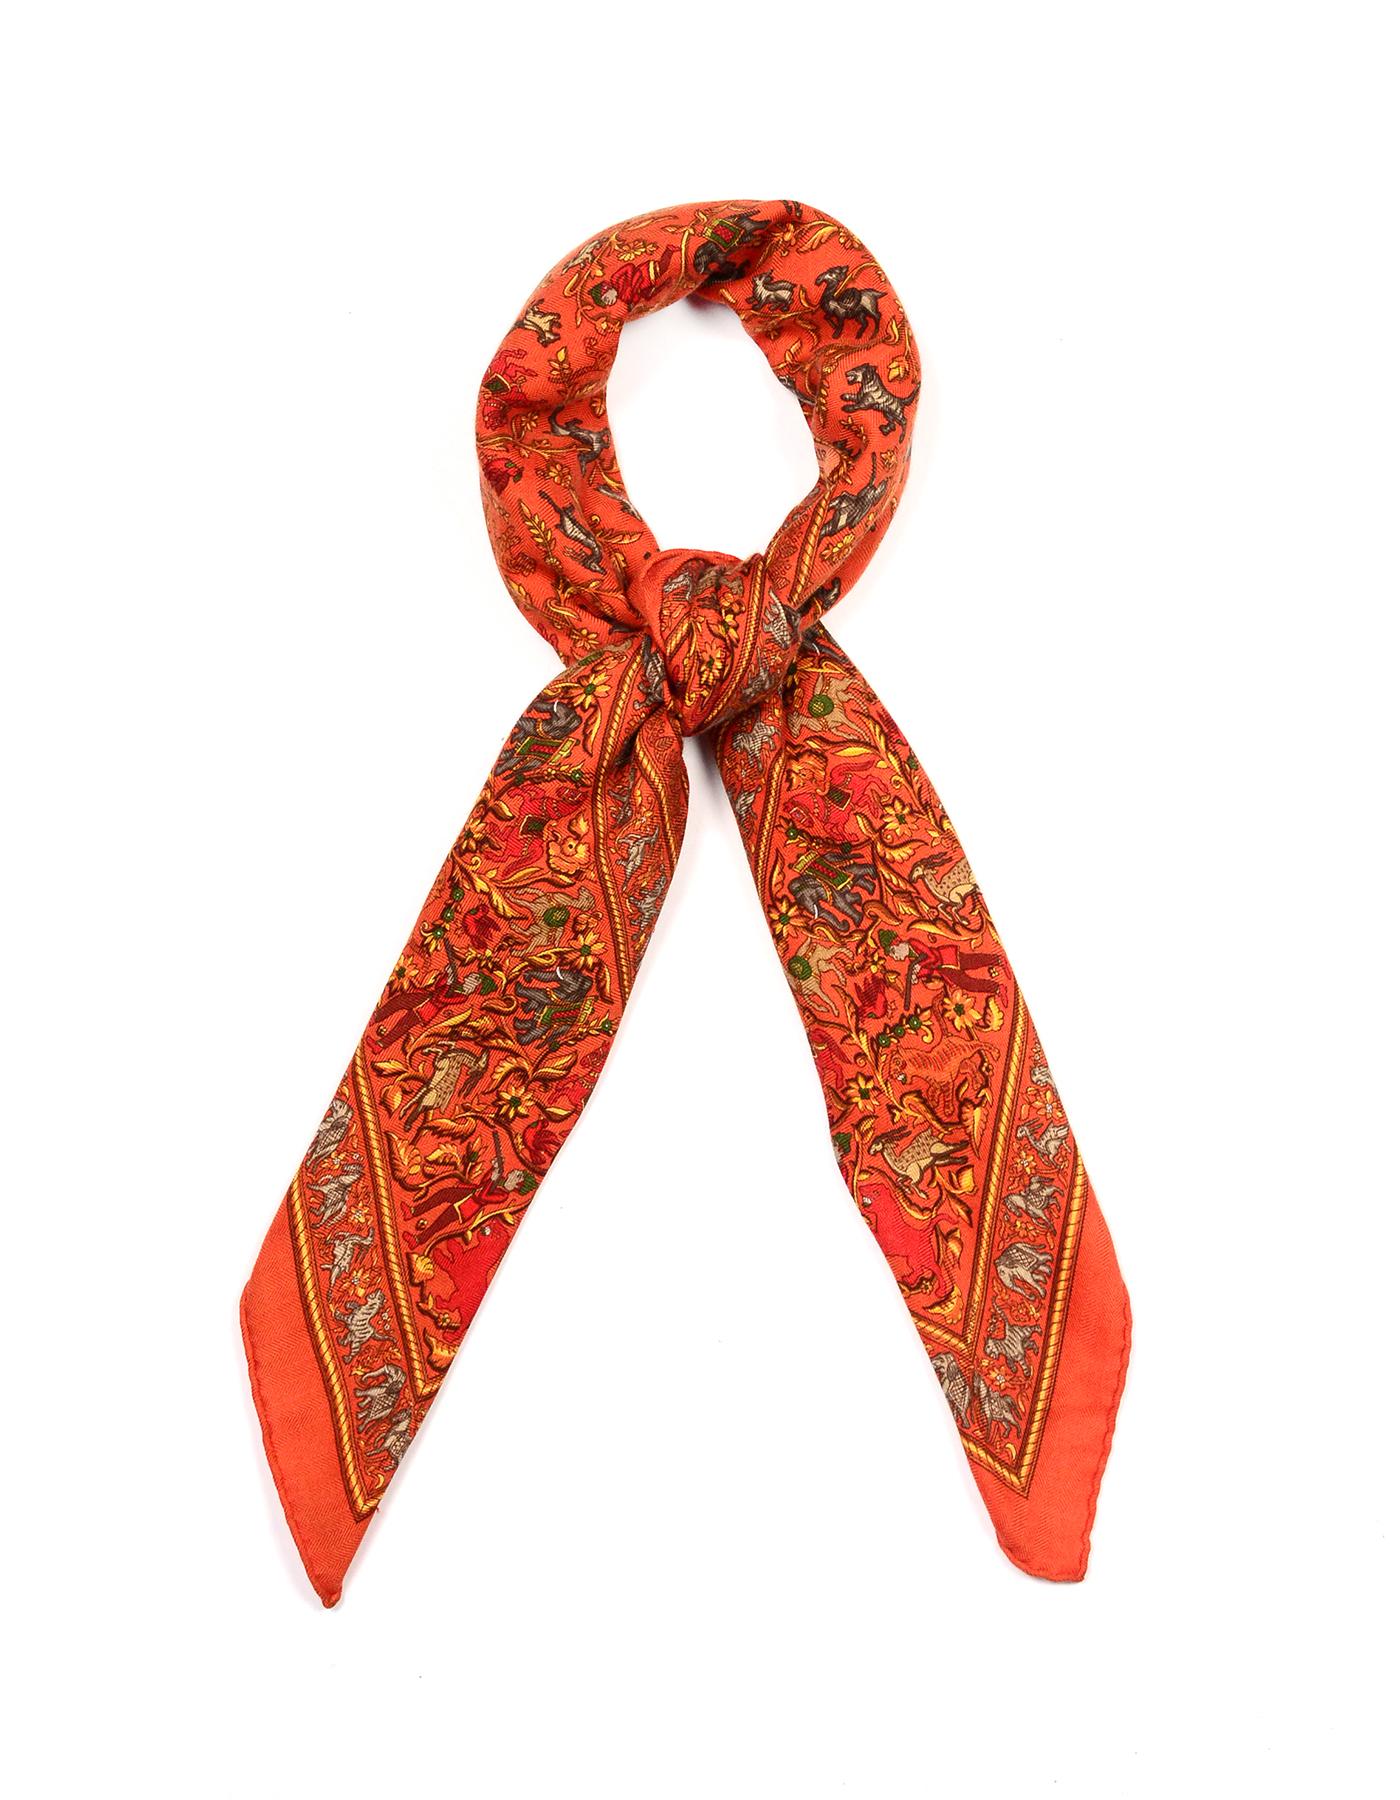 Hermes Orange Chasse En Inde 90cm Silk/Cashmere Scarf

Made In: France   
Color: Orange
Materials: Silk, cashmere (no composition tag)
Overall Condition: Excellent pre-owned condition 

Measurements: 90cm
35